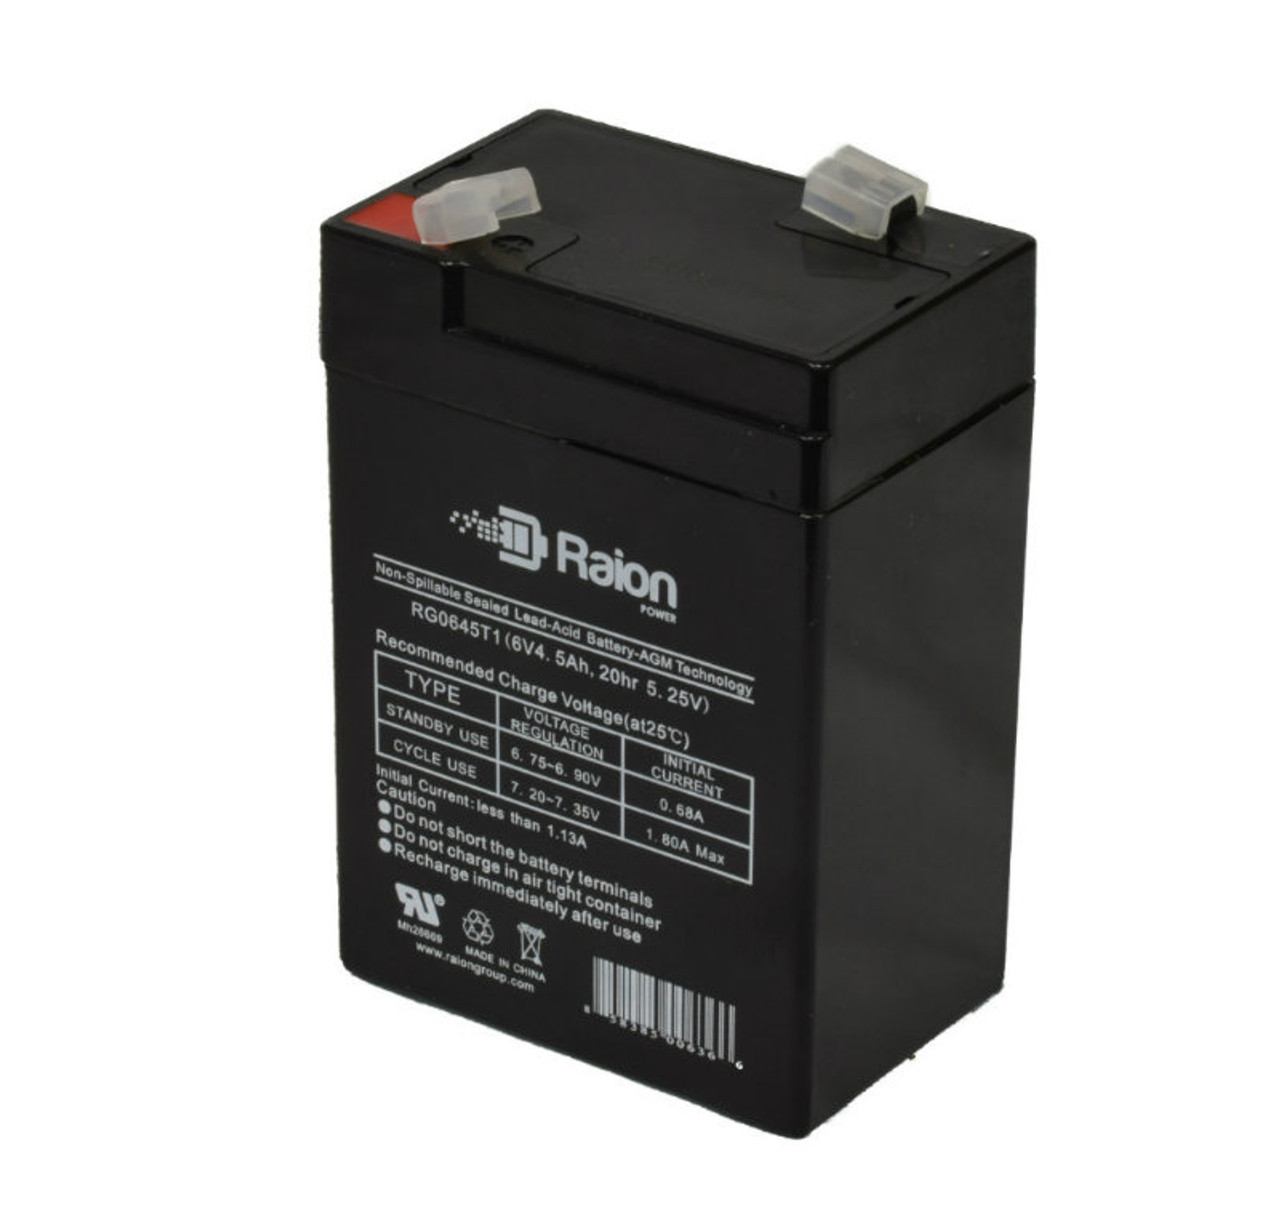 Raion Power RG0645T1 6V 4.5Ah Replacement Battery Cartridge for Lithonia EMB20605